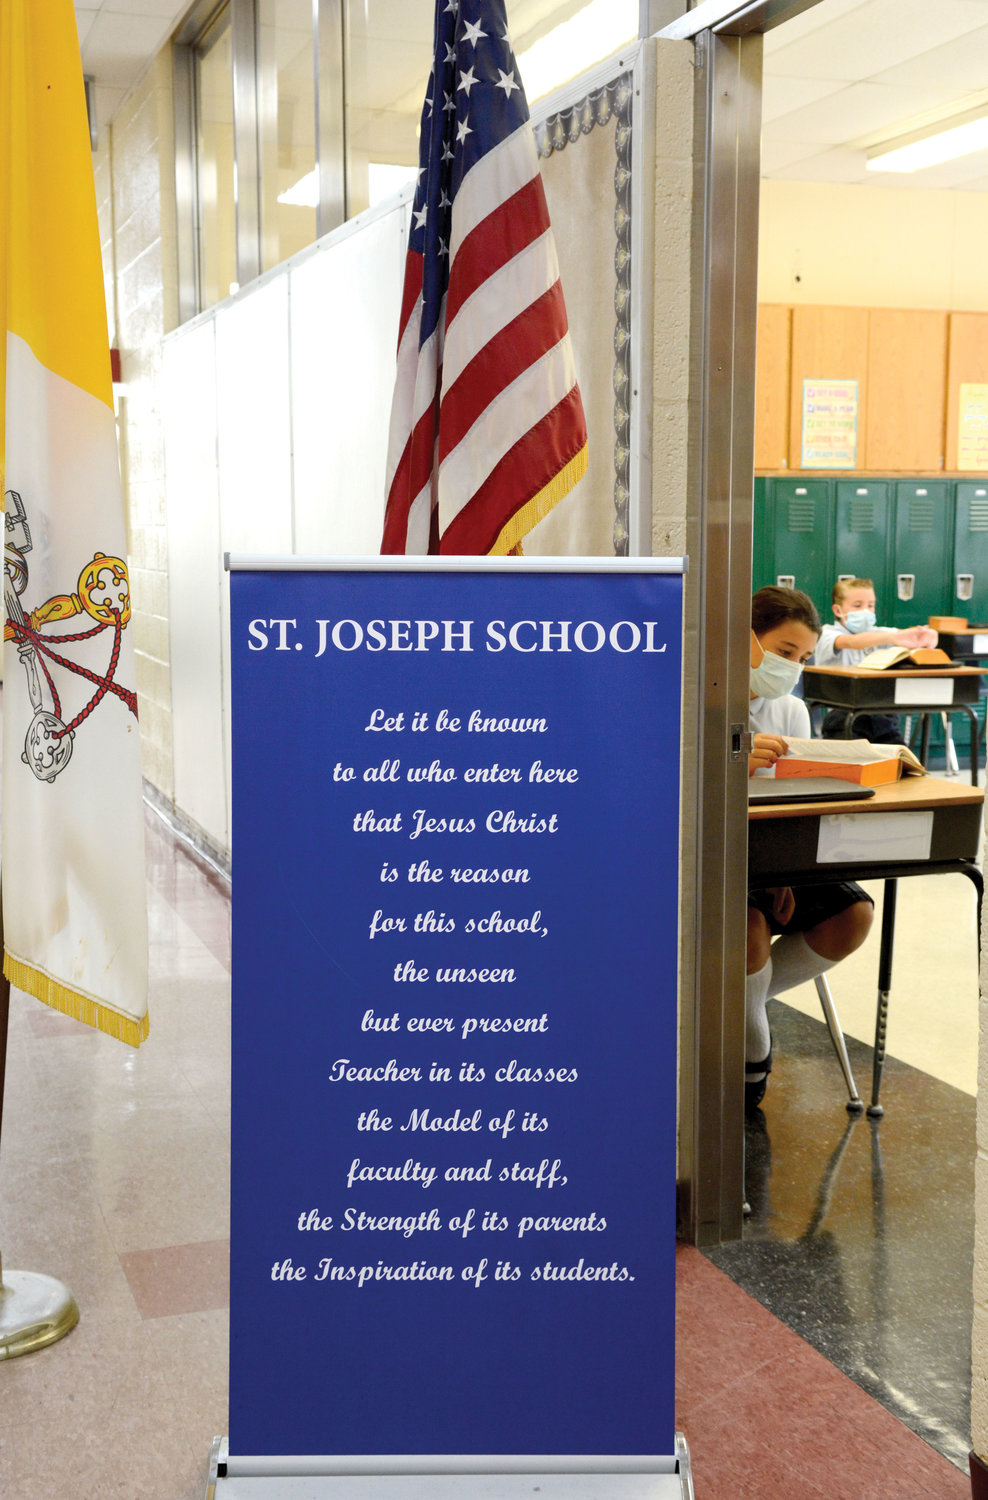 The school’s adherence to Catholic identity is showcased through an inspirational banner placed near the Vatican and American flags.